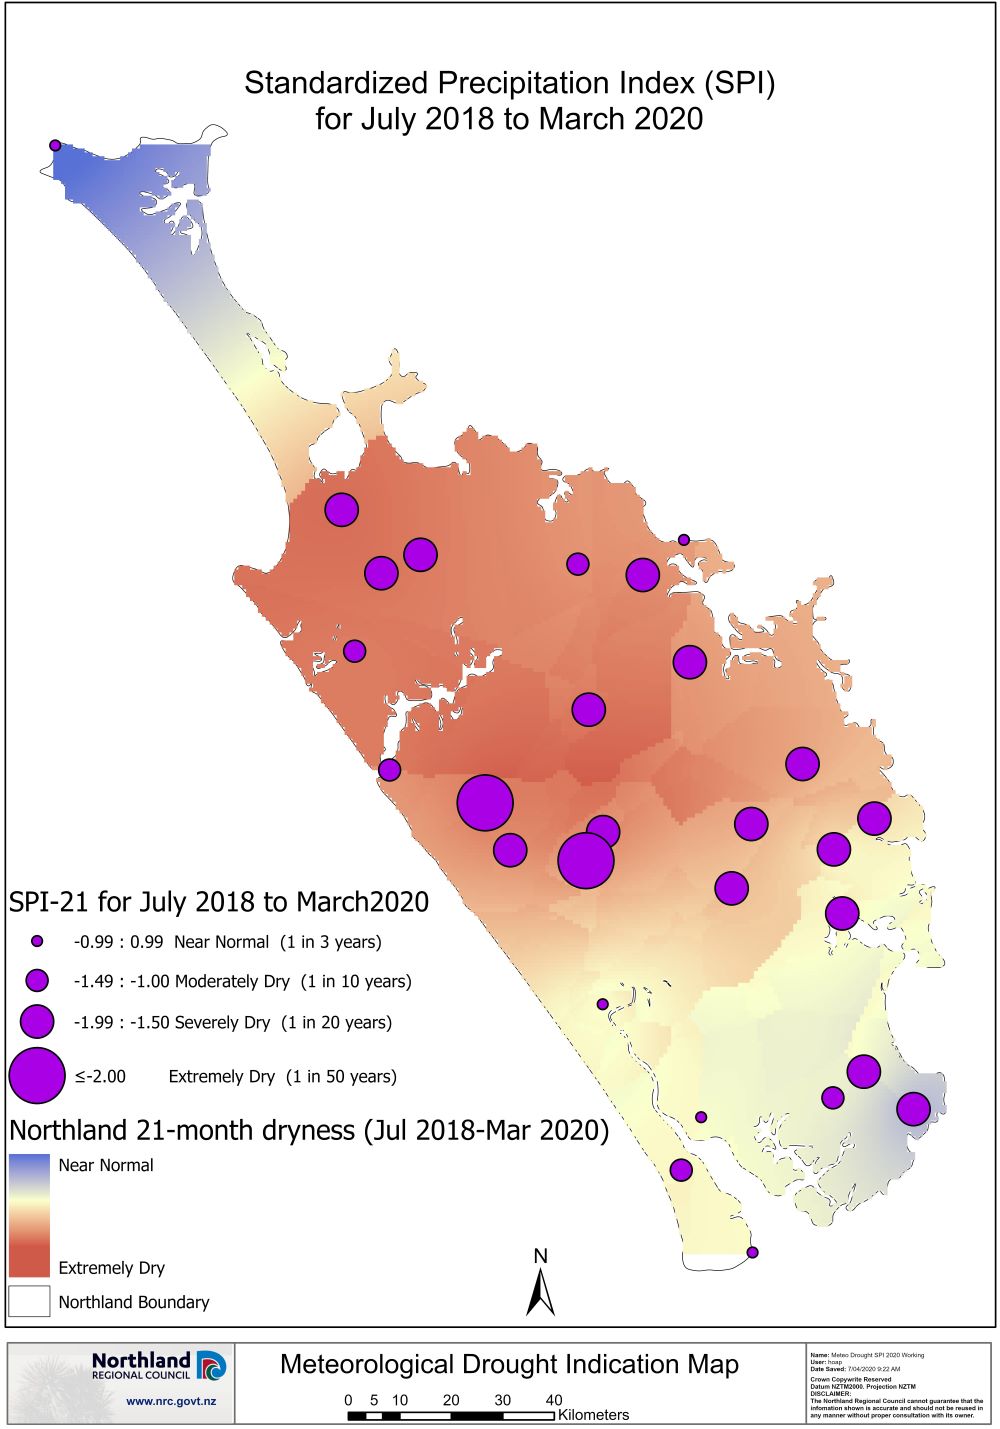 Meteorlogical drought indication map July 2018-March 2020.